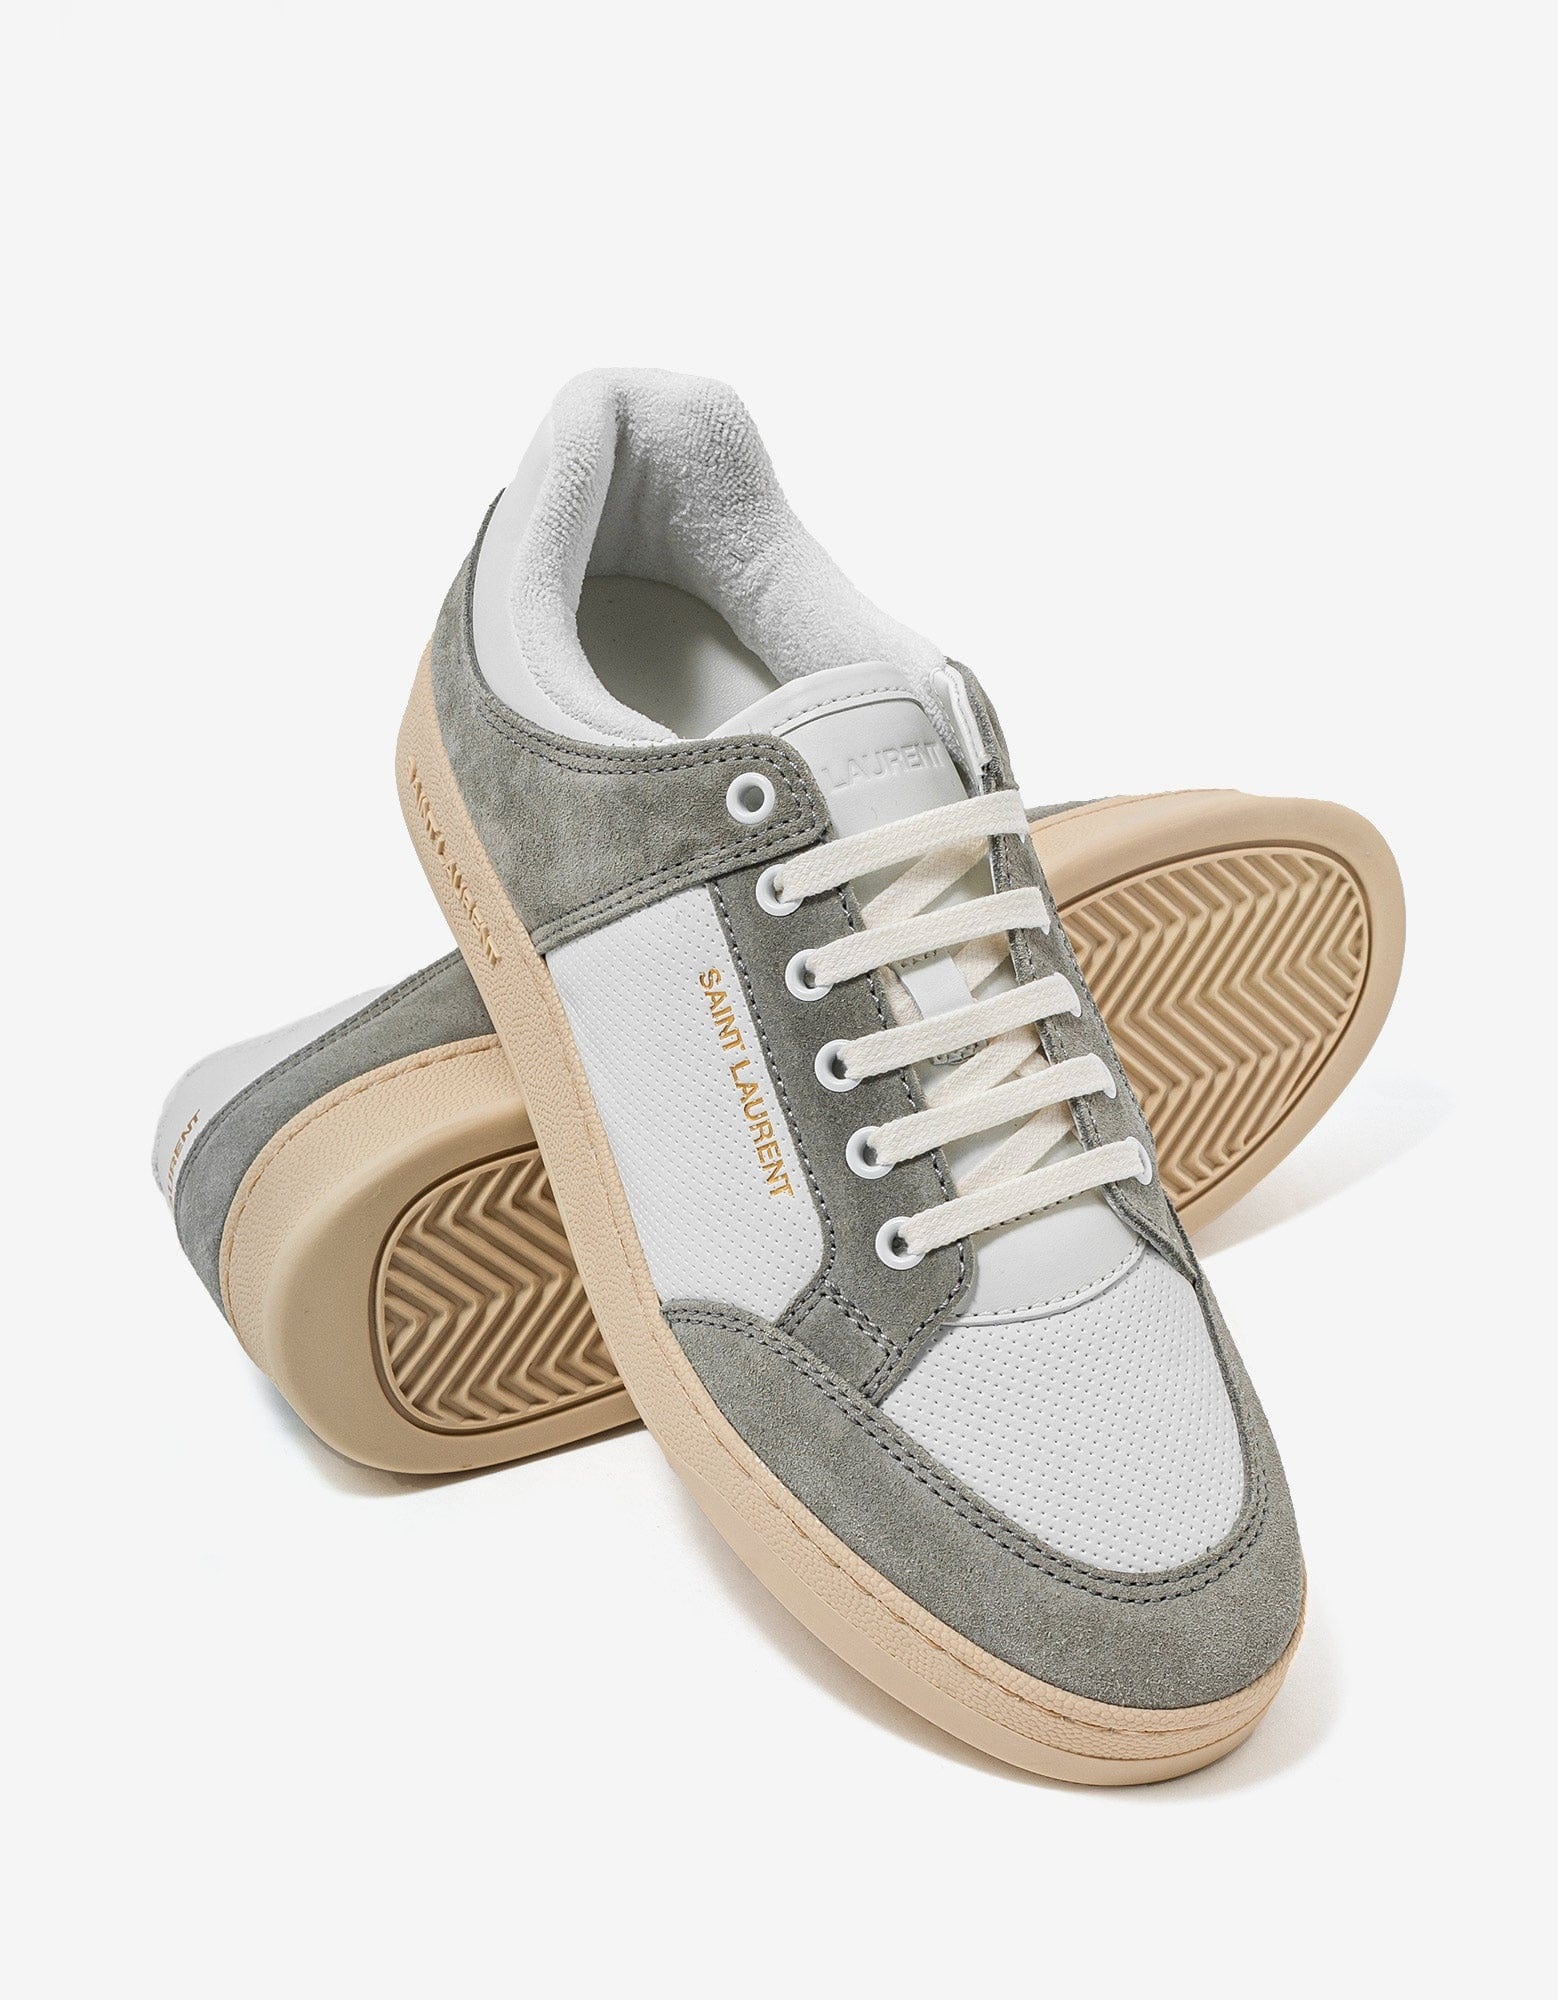 White & Grey SL/61 Leather Trainers - 8